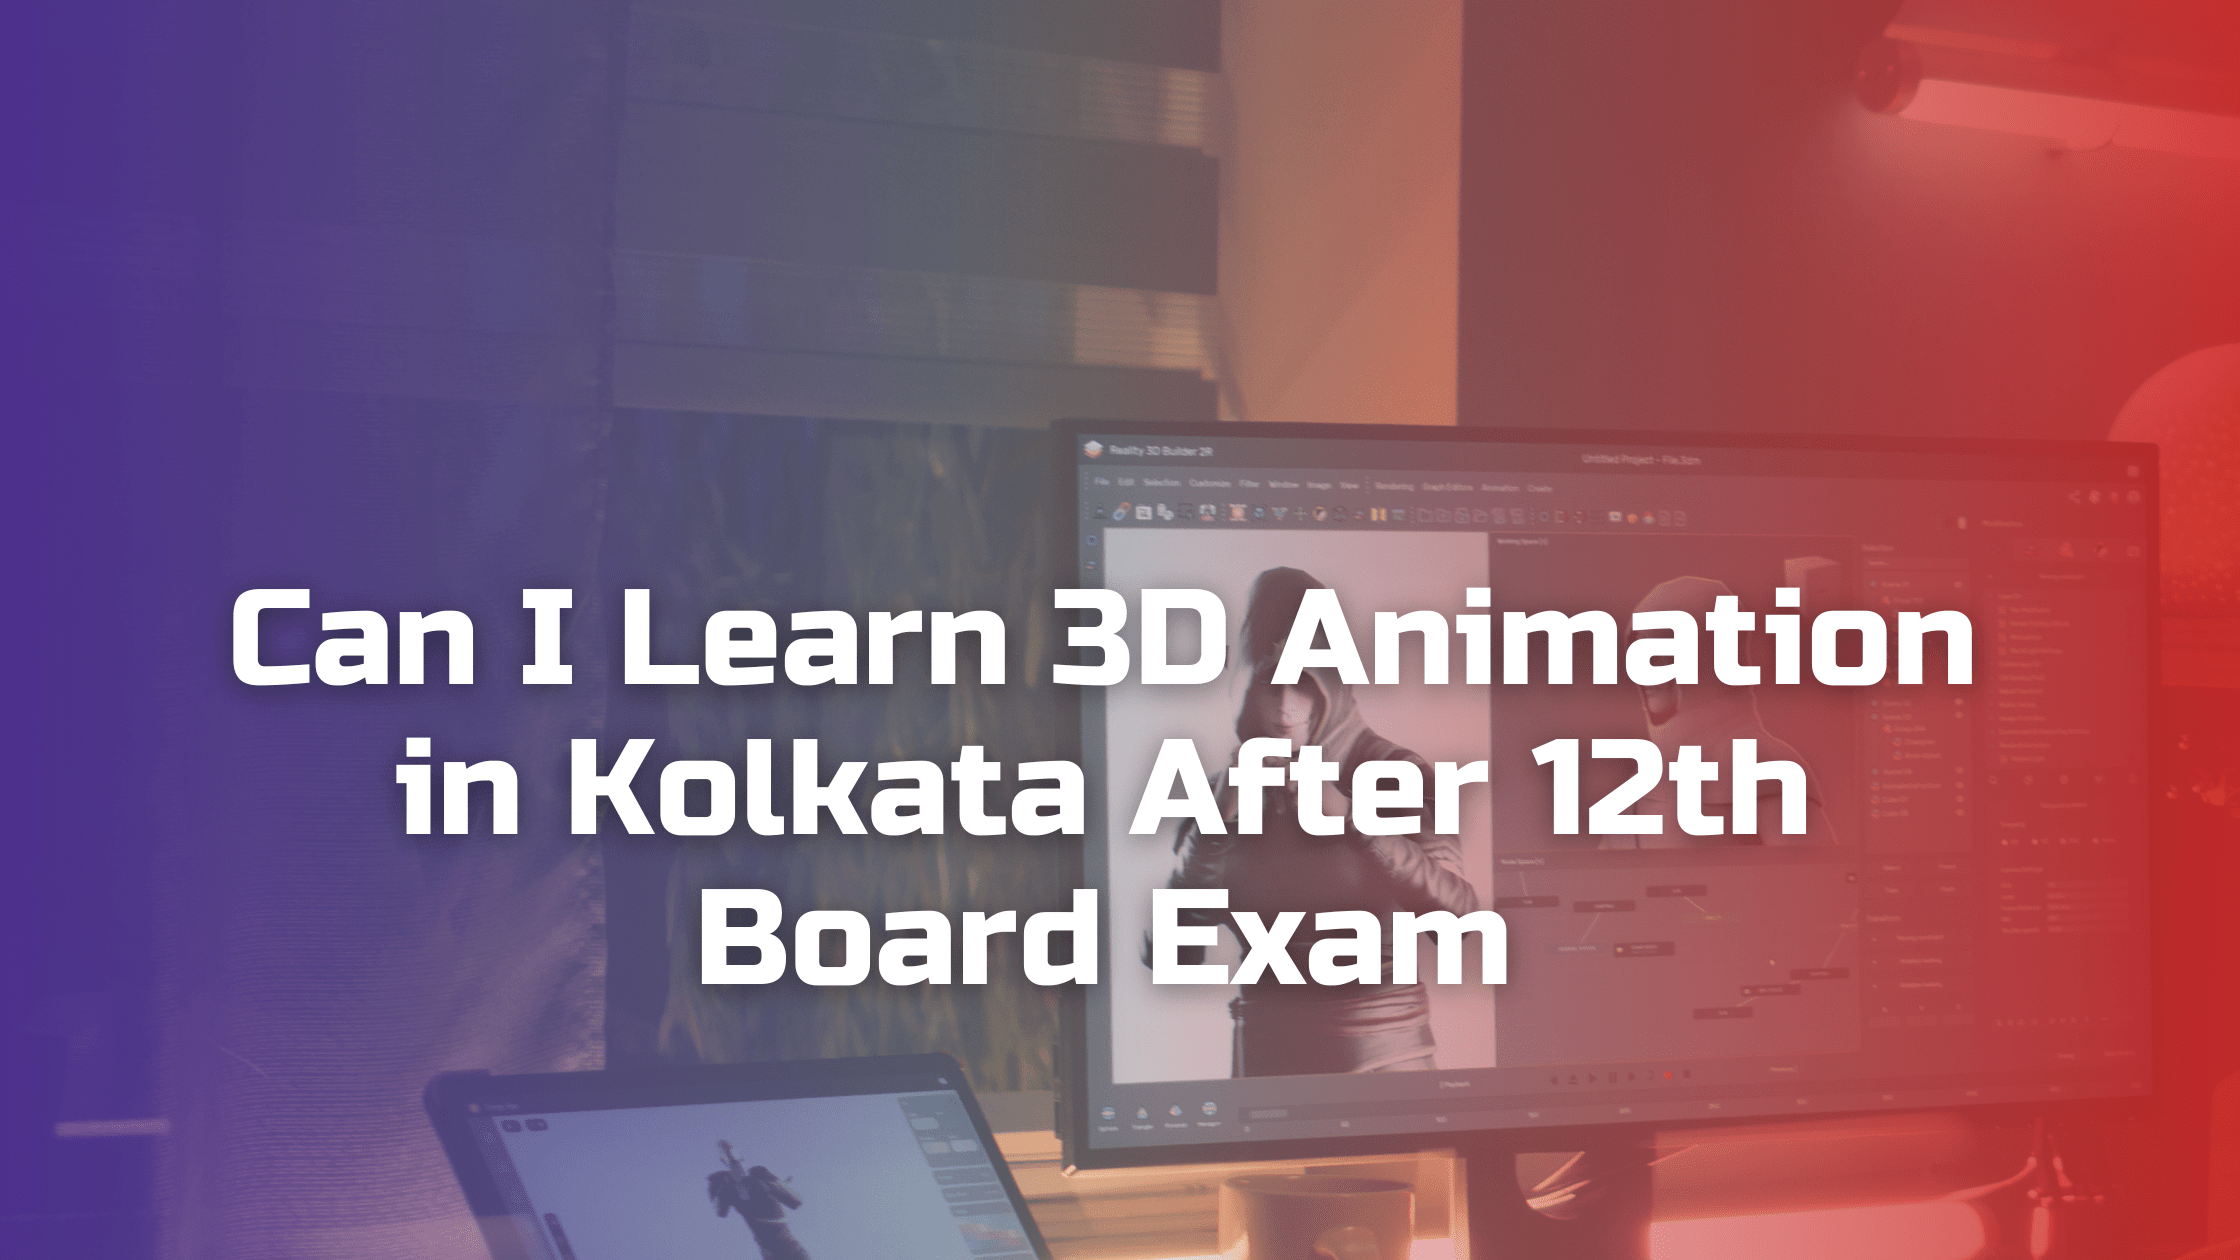 Can I Learn 3D Animation in Kolkata After 12th Board Exam